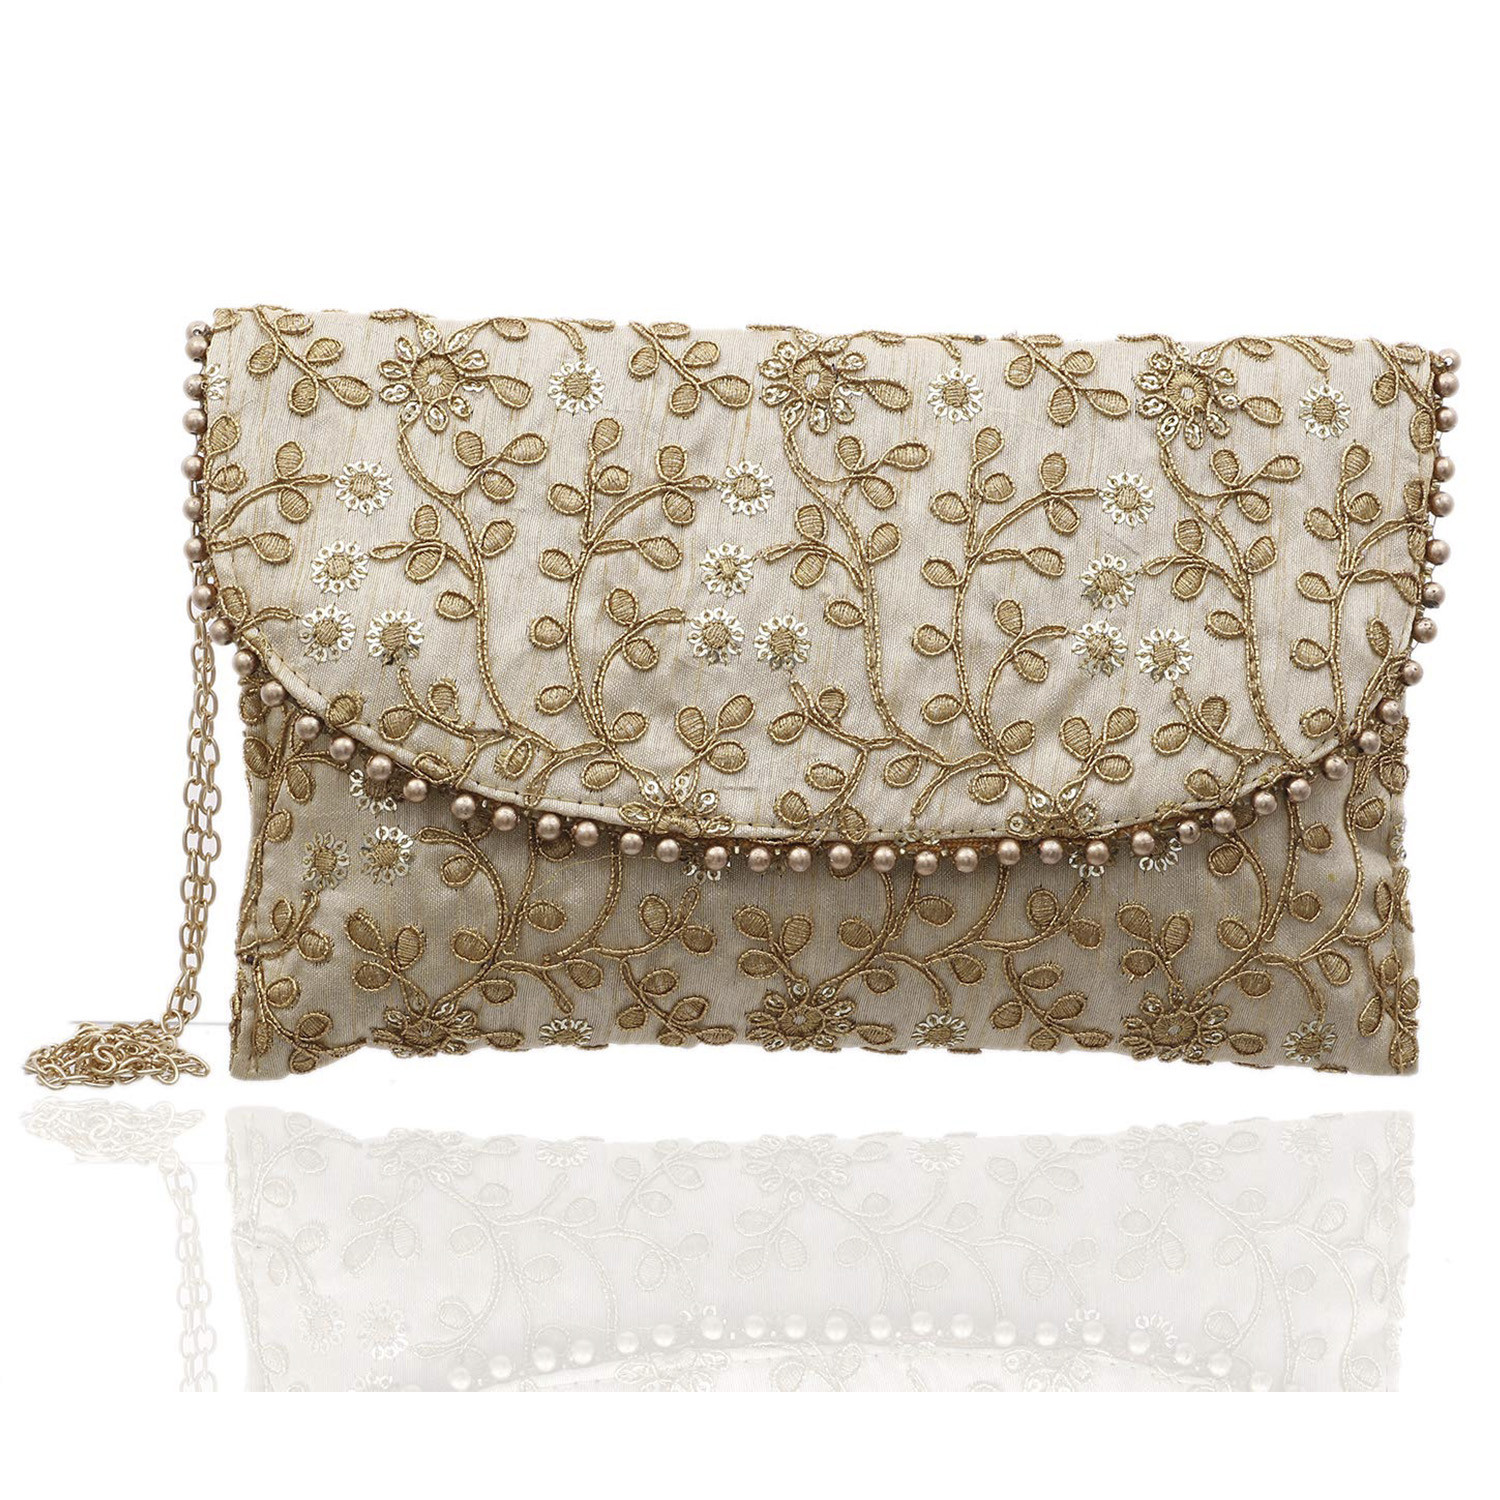 Kuber Industries Embroidery Golden Pearl Border Clutch|Hand Purse & Pearls Handle With Magnetic Lock For Woman,Girls (Cream)